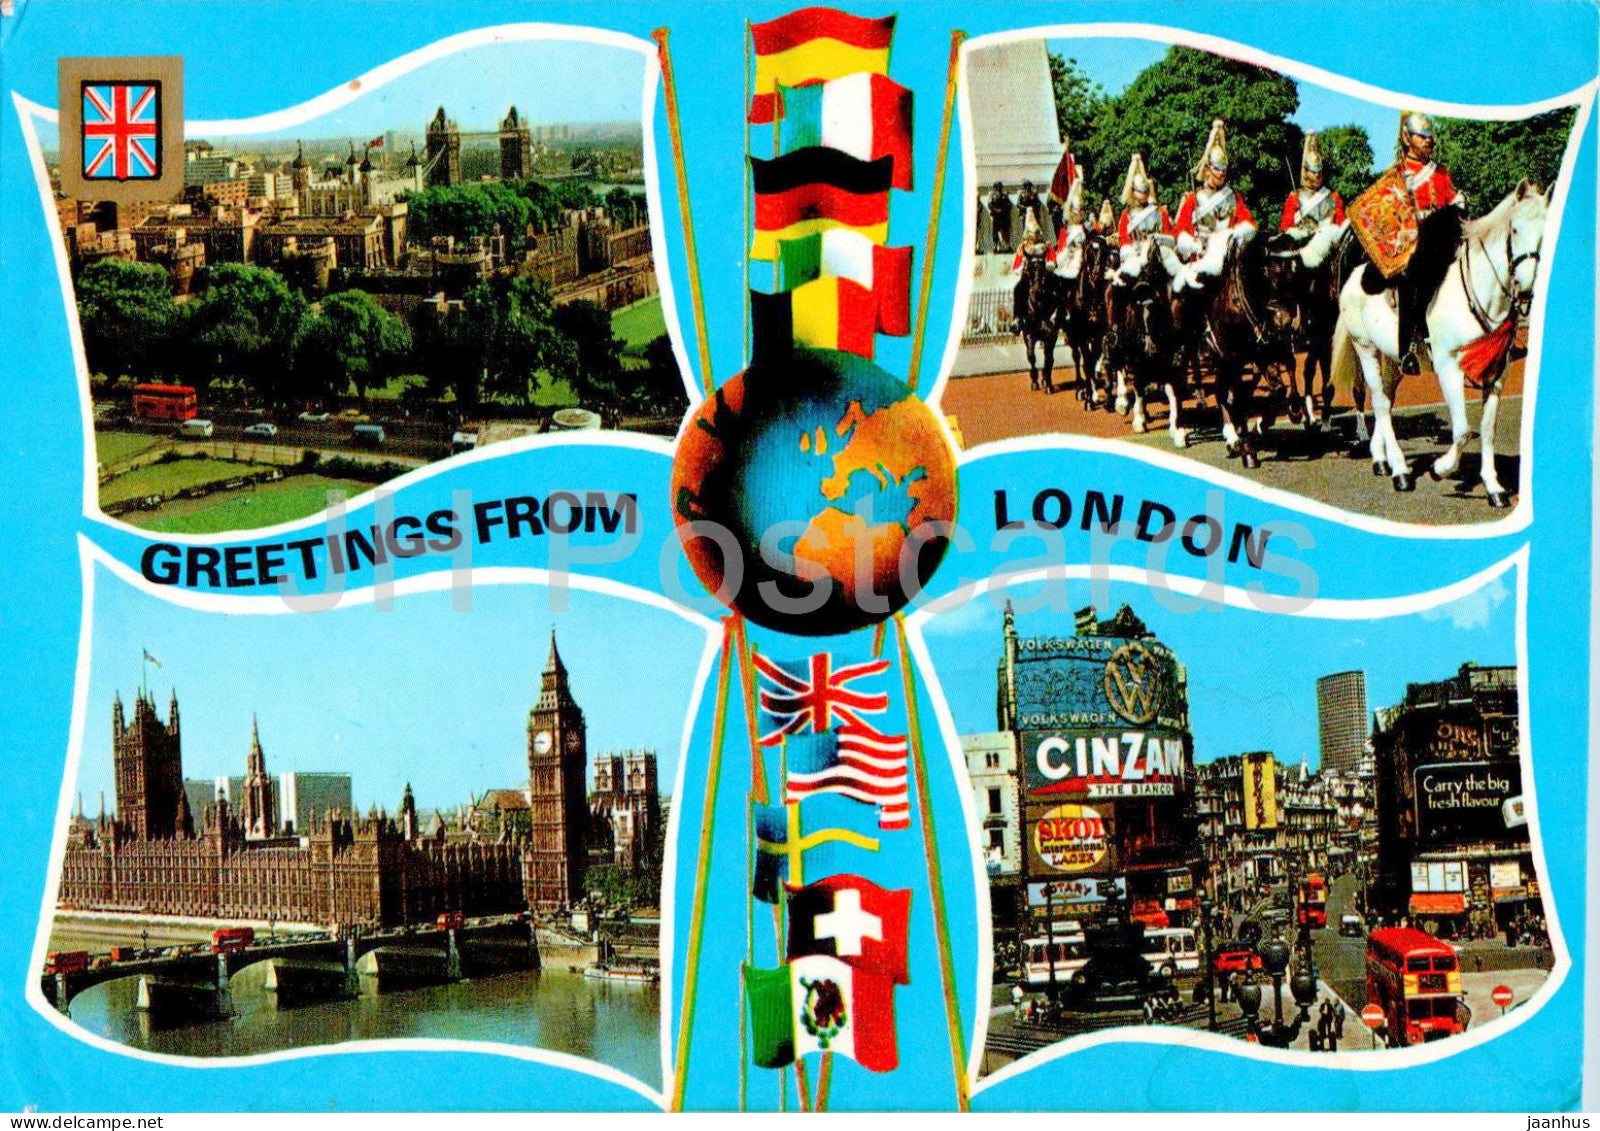 London - Greetings from London - horse - multiview - 1985 - England - United Kingdom - used